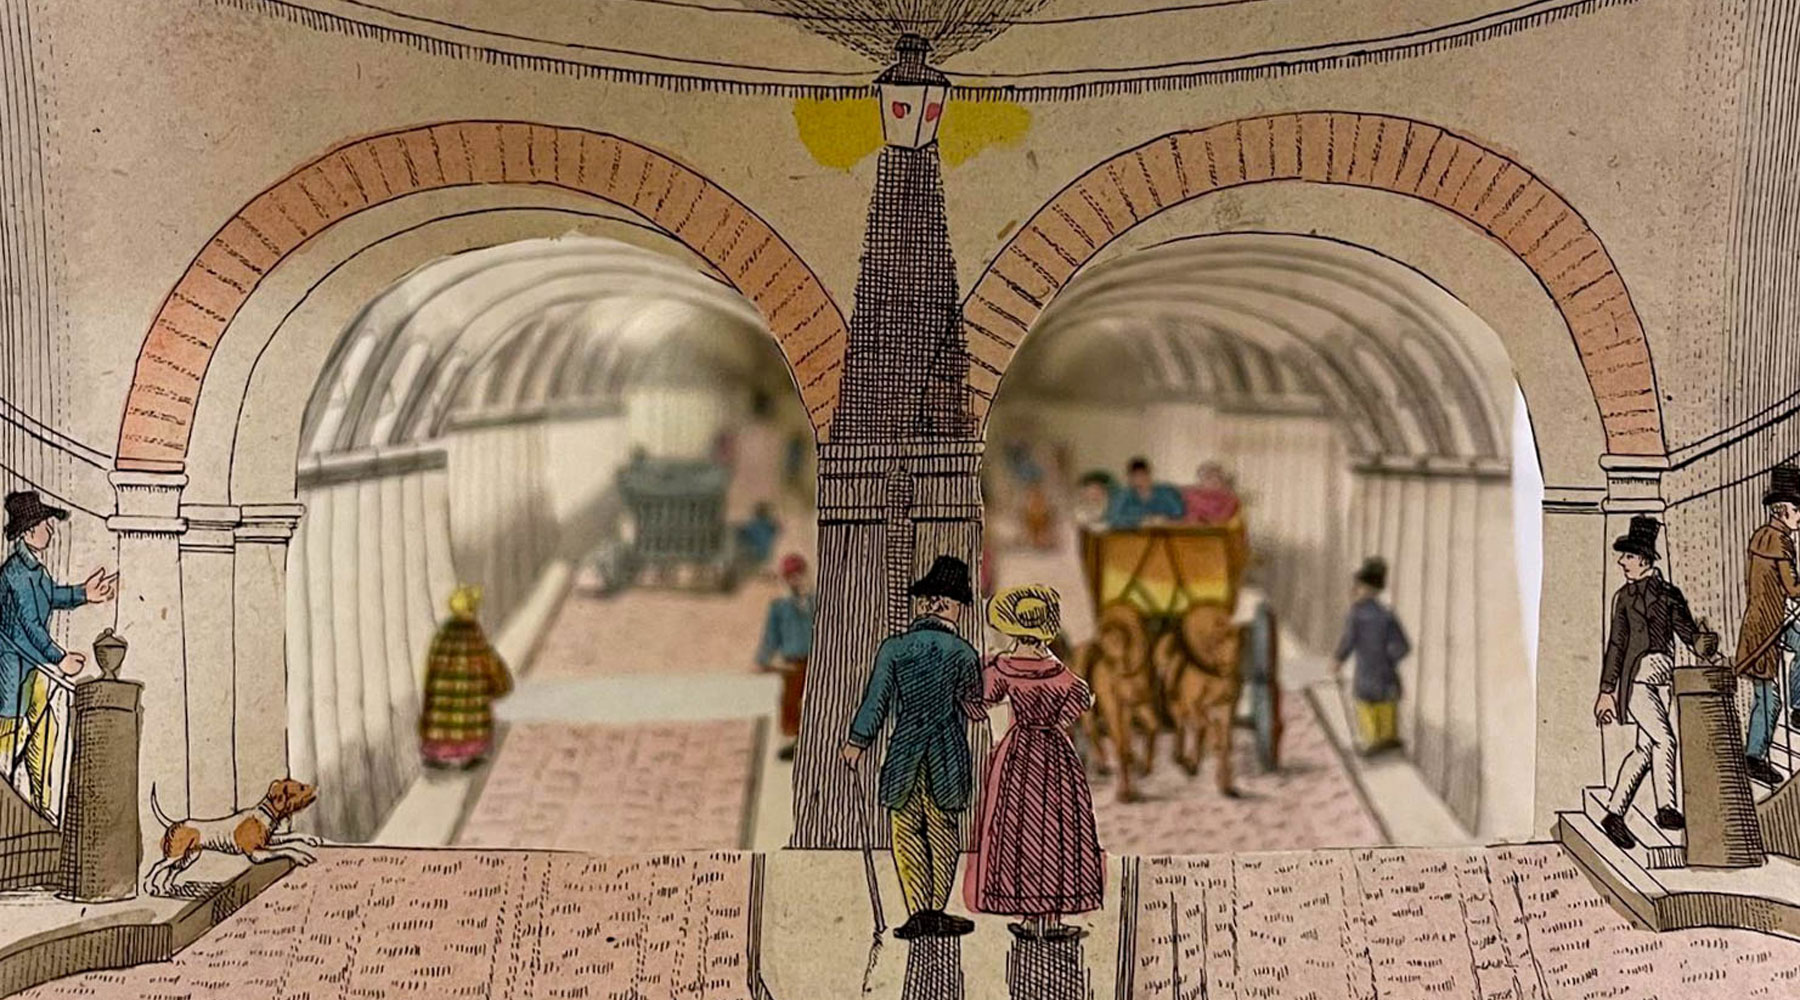 Victorian peepshow of the Thames Tunnel up for sale